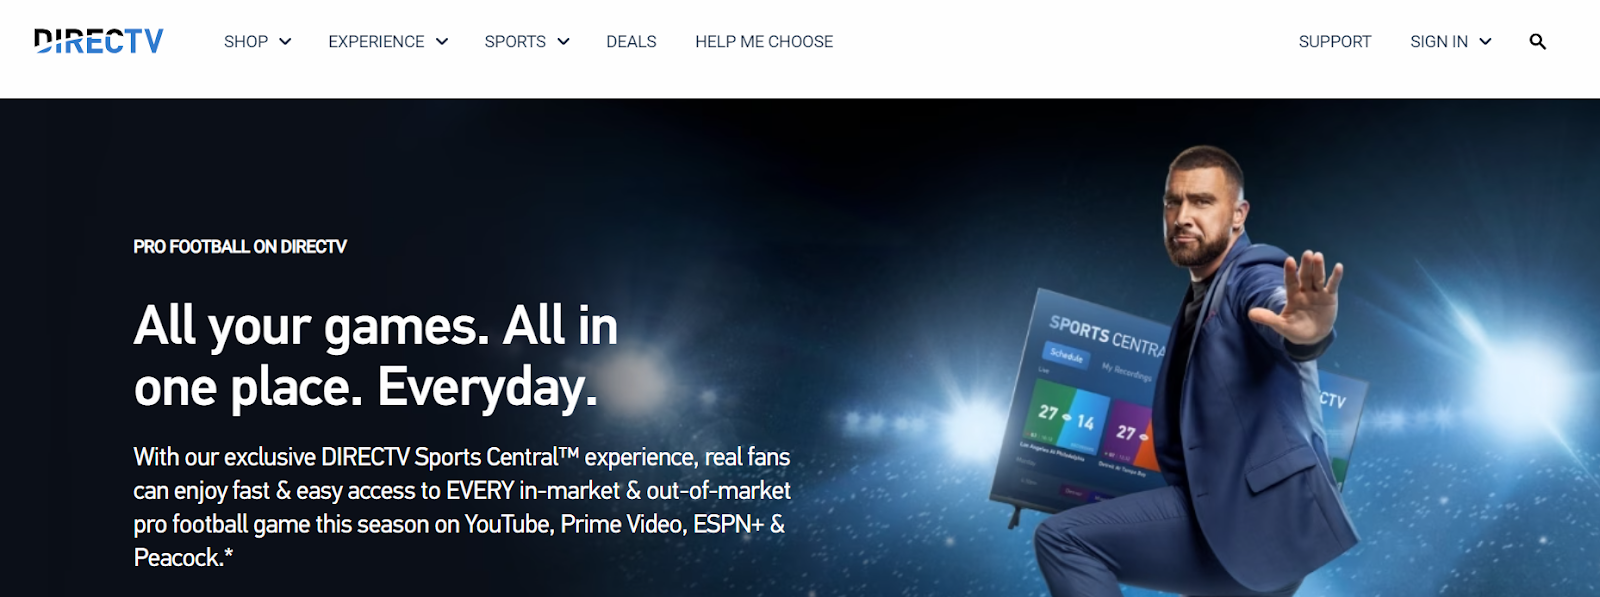 DIRECTV STREAM is where you can catch in-market and out of market games
